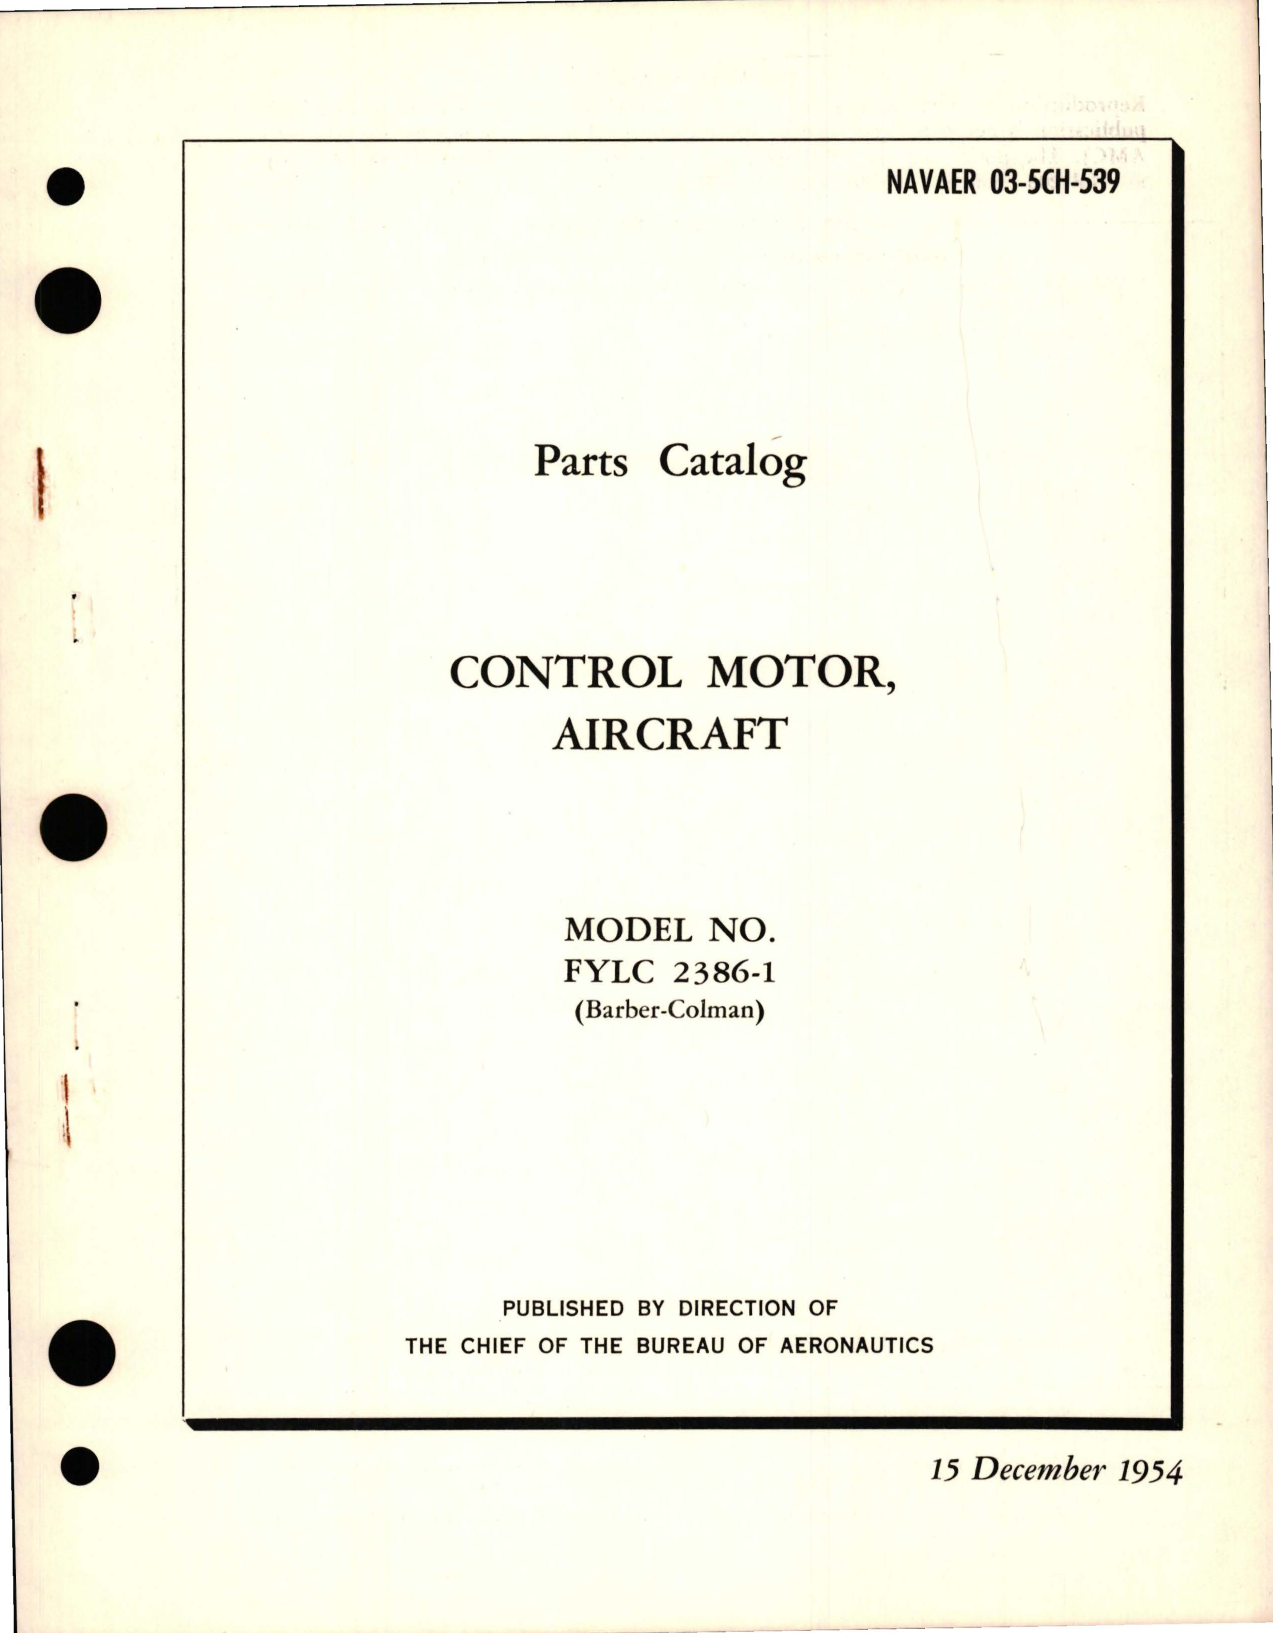 Sample page 1 from AirCorps Library document: Parts Catalog for Control Motor - Model FYLC 2386-1